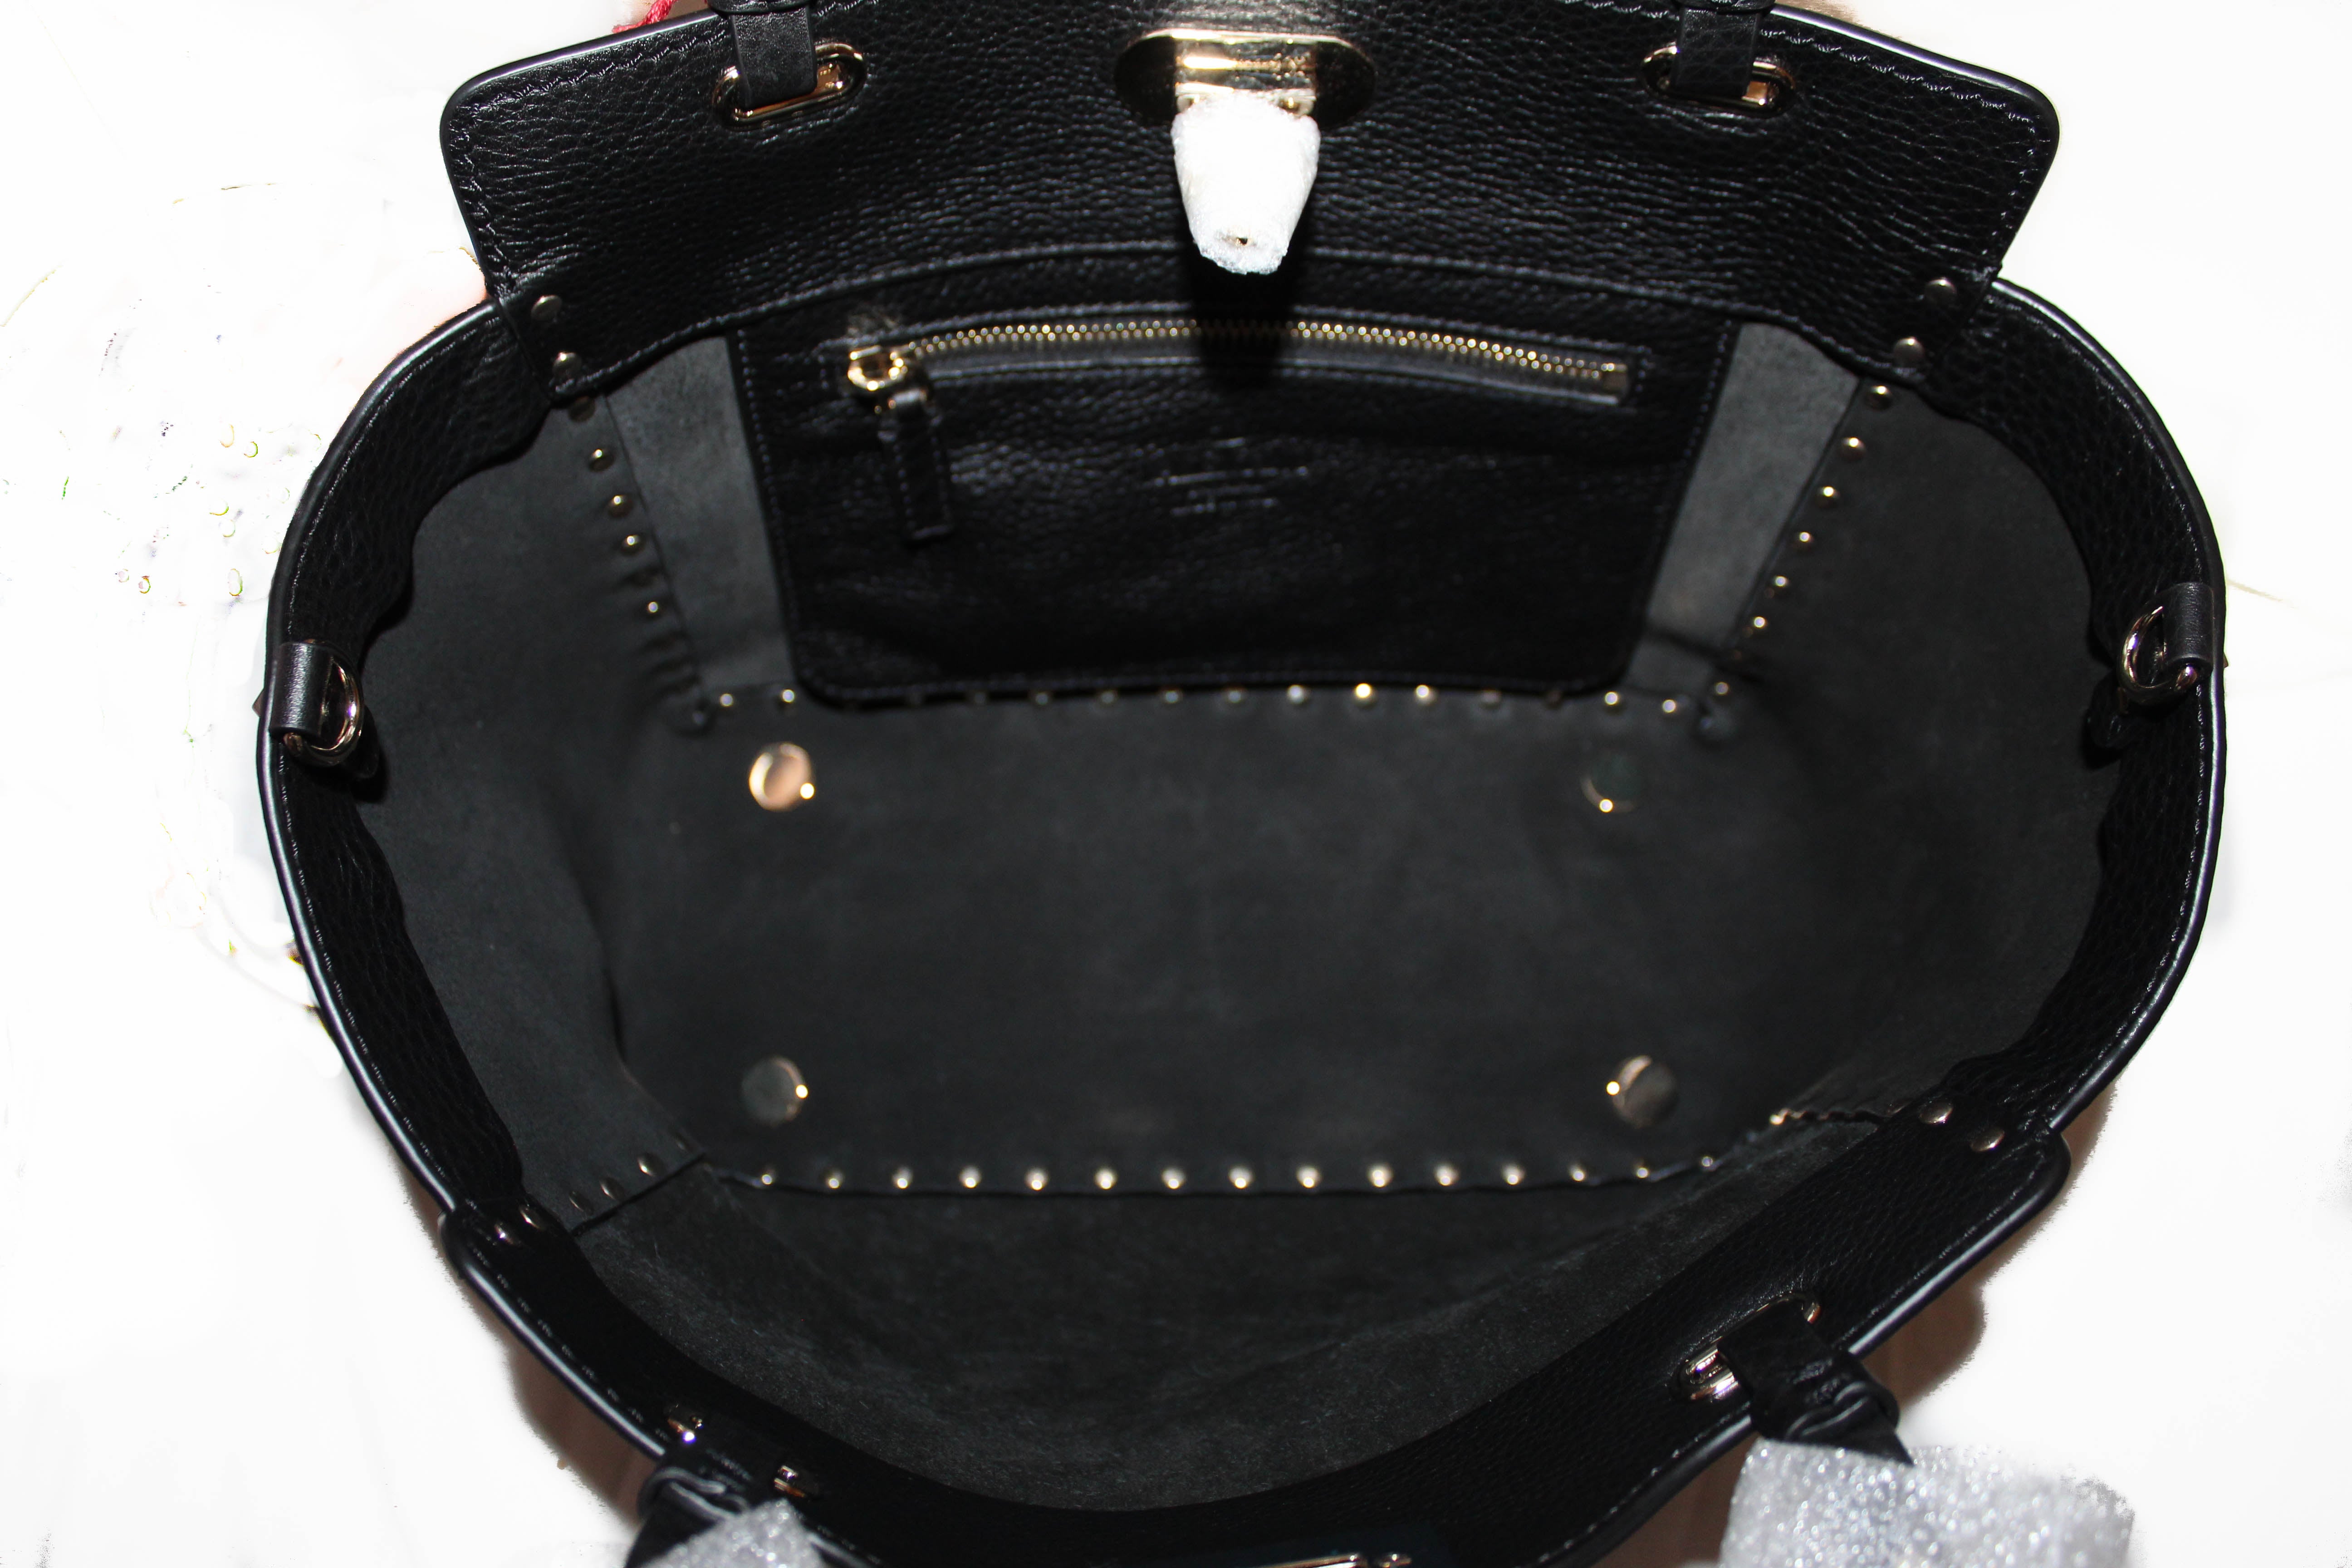 Authentic New Valentino Black Small Rockstud Calfskin Leather Tote Shoulder Bag